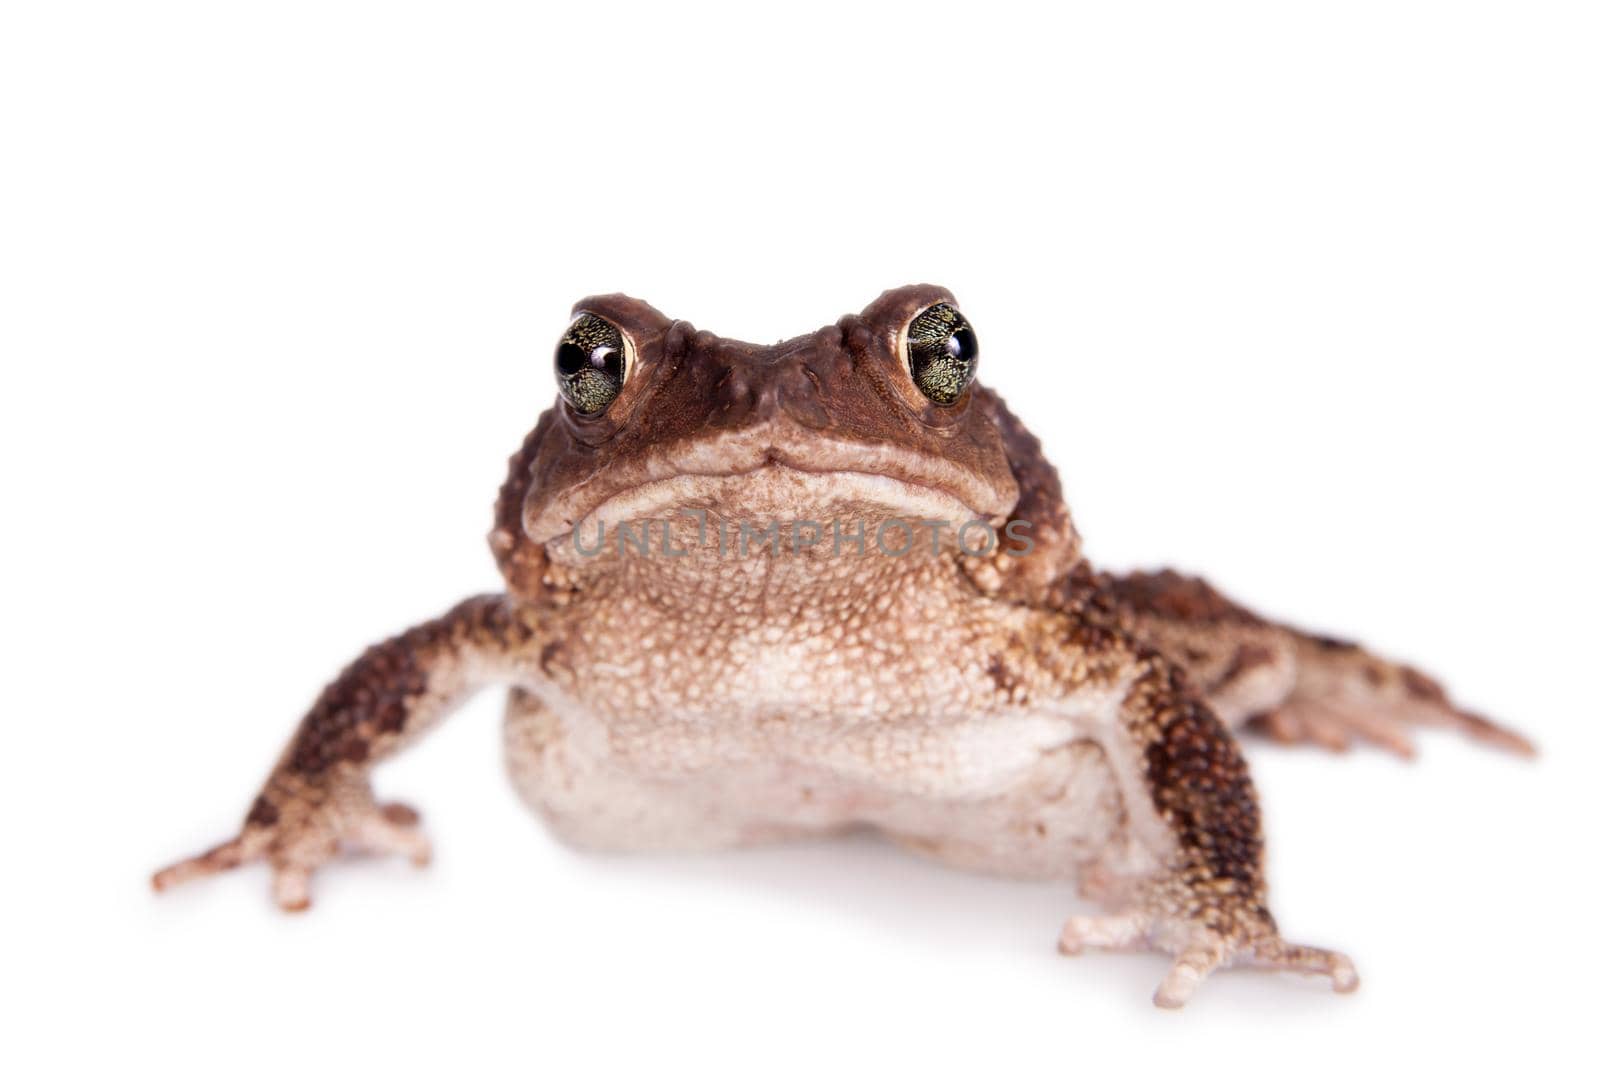 The Bufo peltocephalus isolated on white by RosaJay